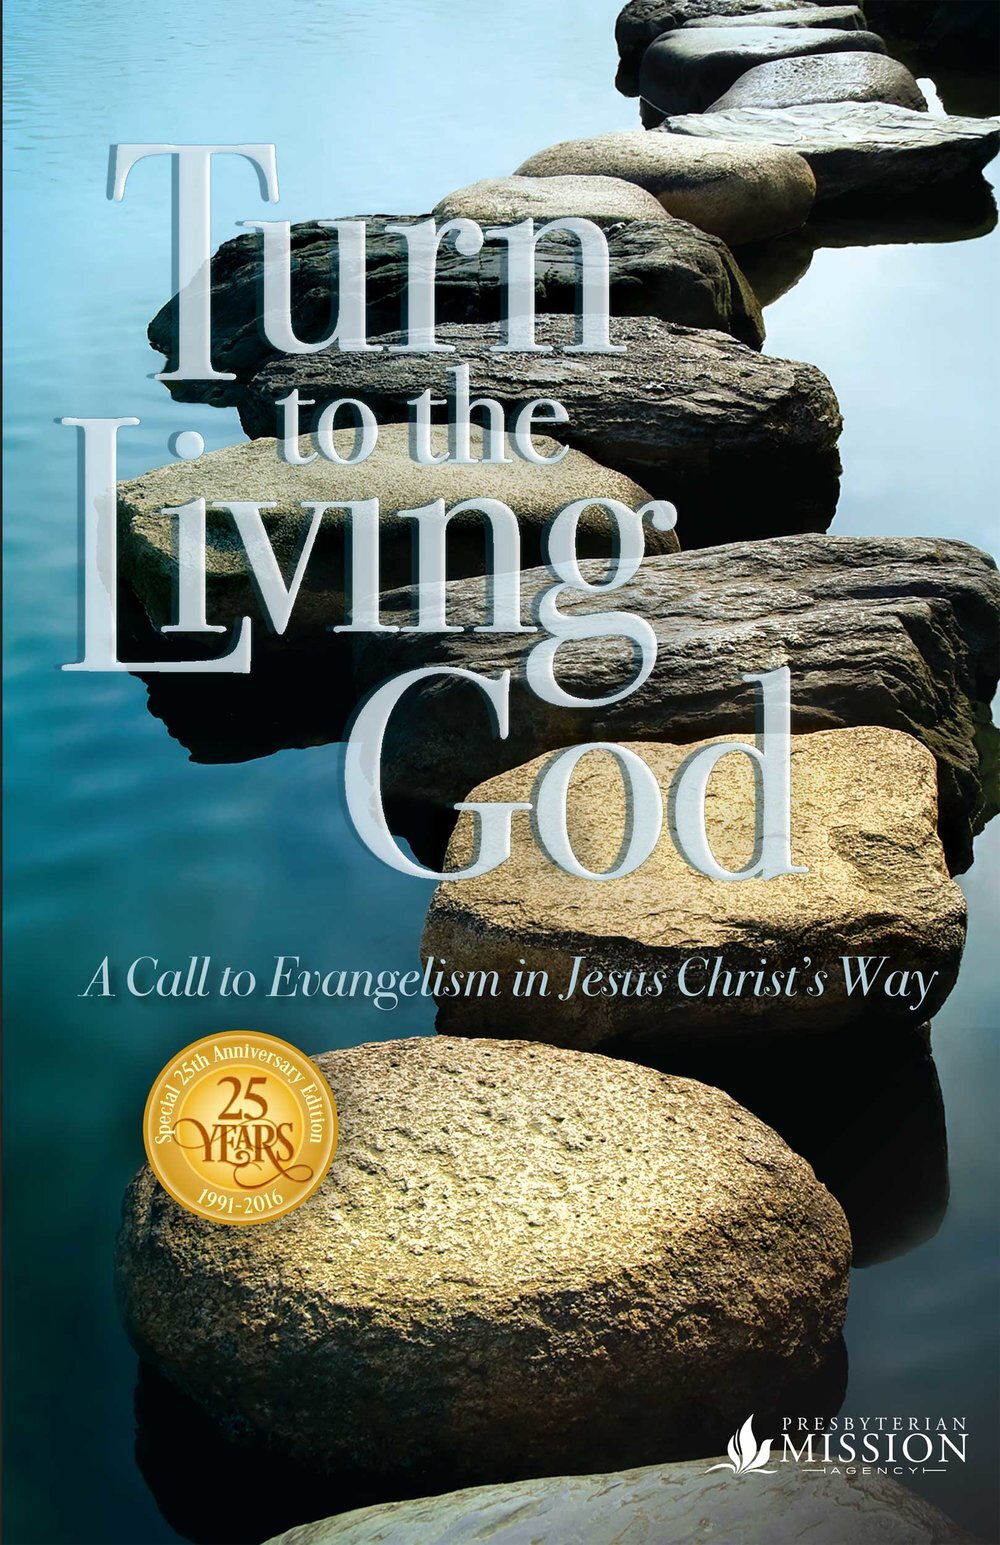  Cover of “Turn to the Living God”  